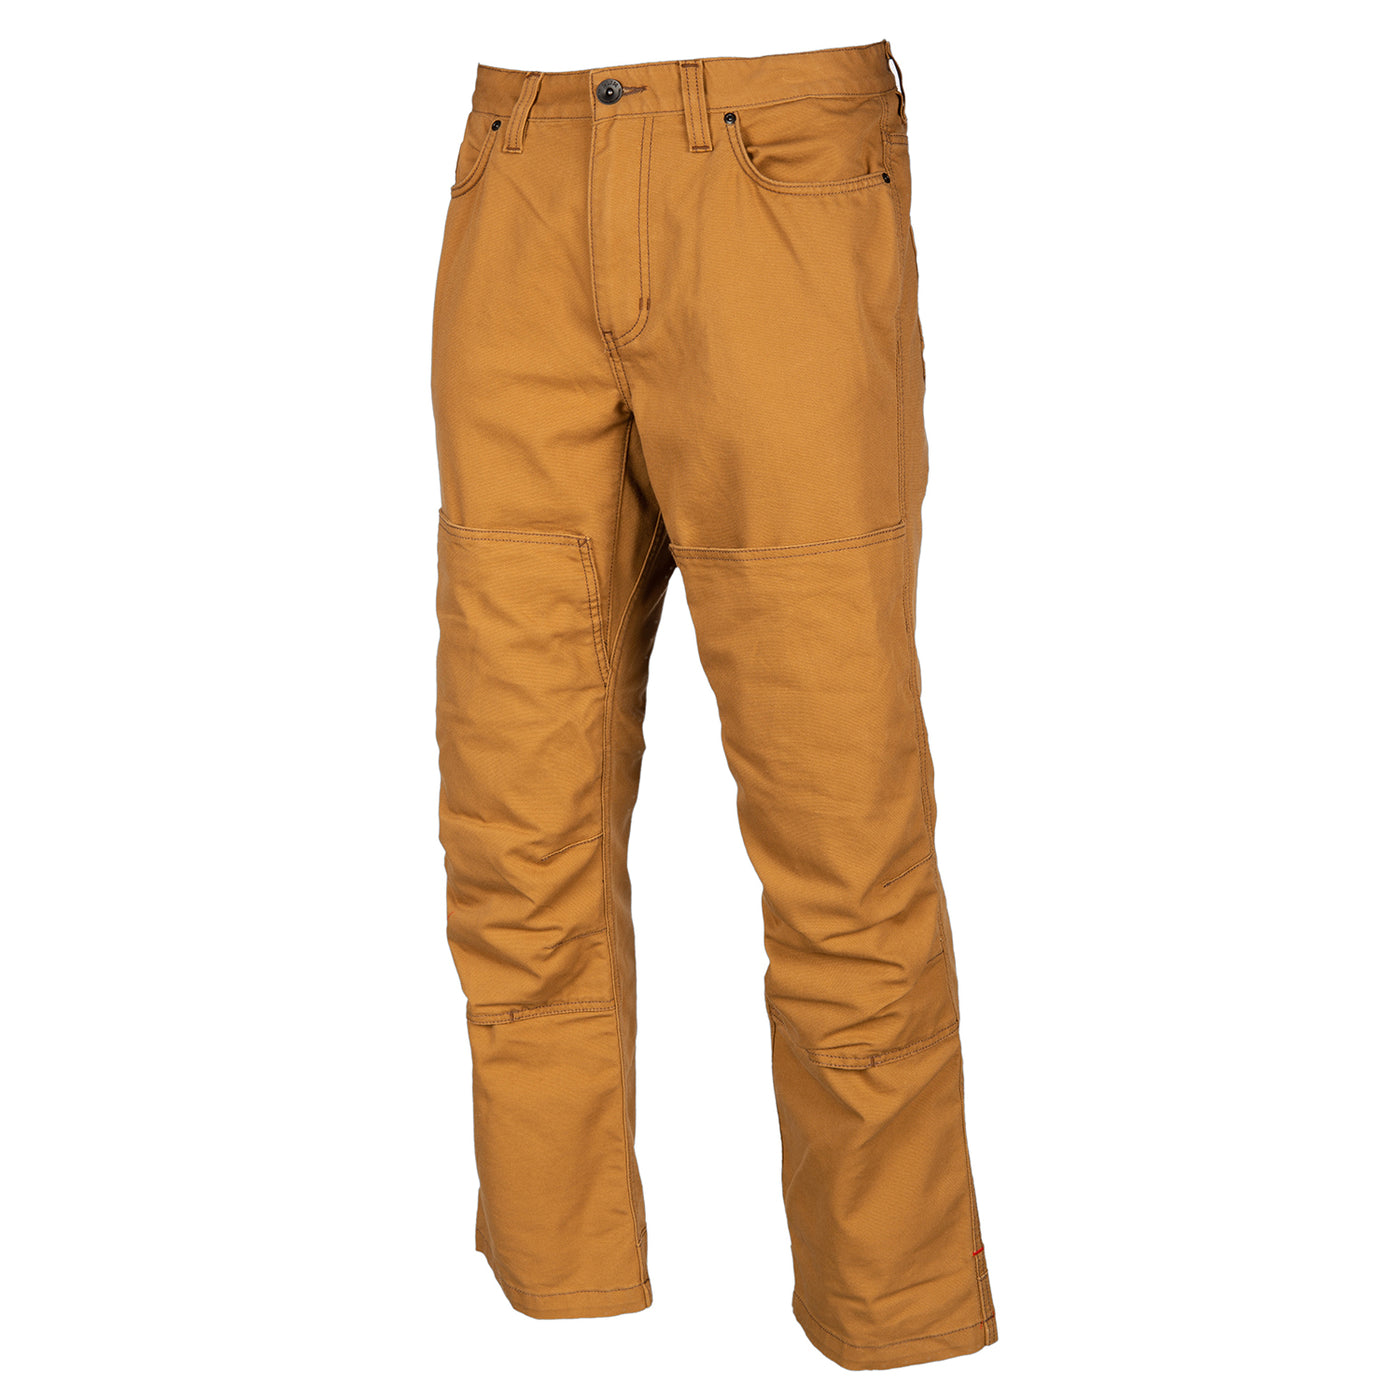 Klim Outrider Pant Brown Duck